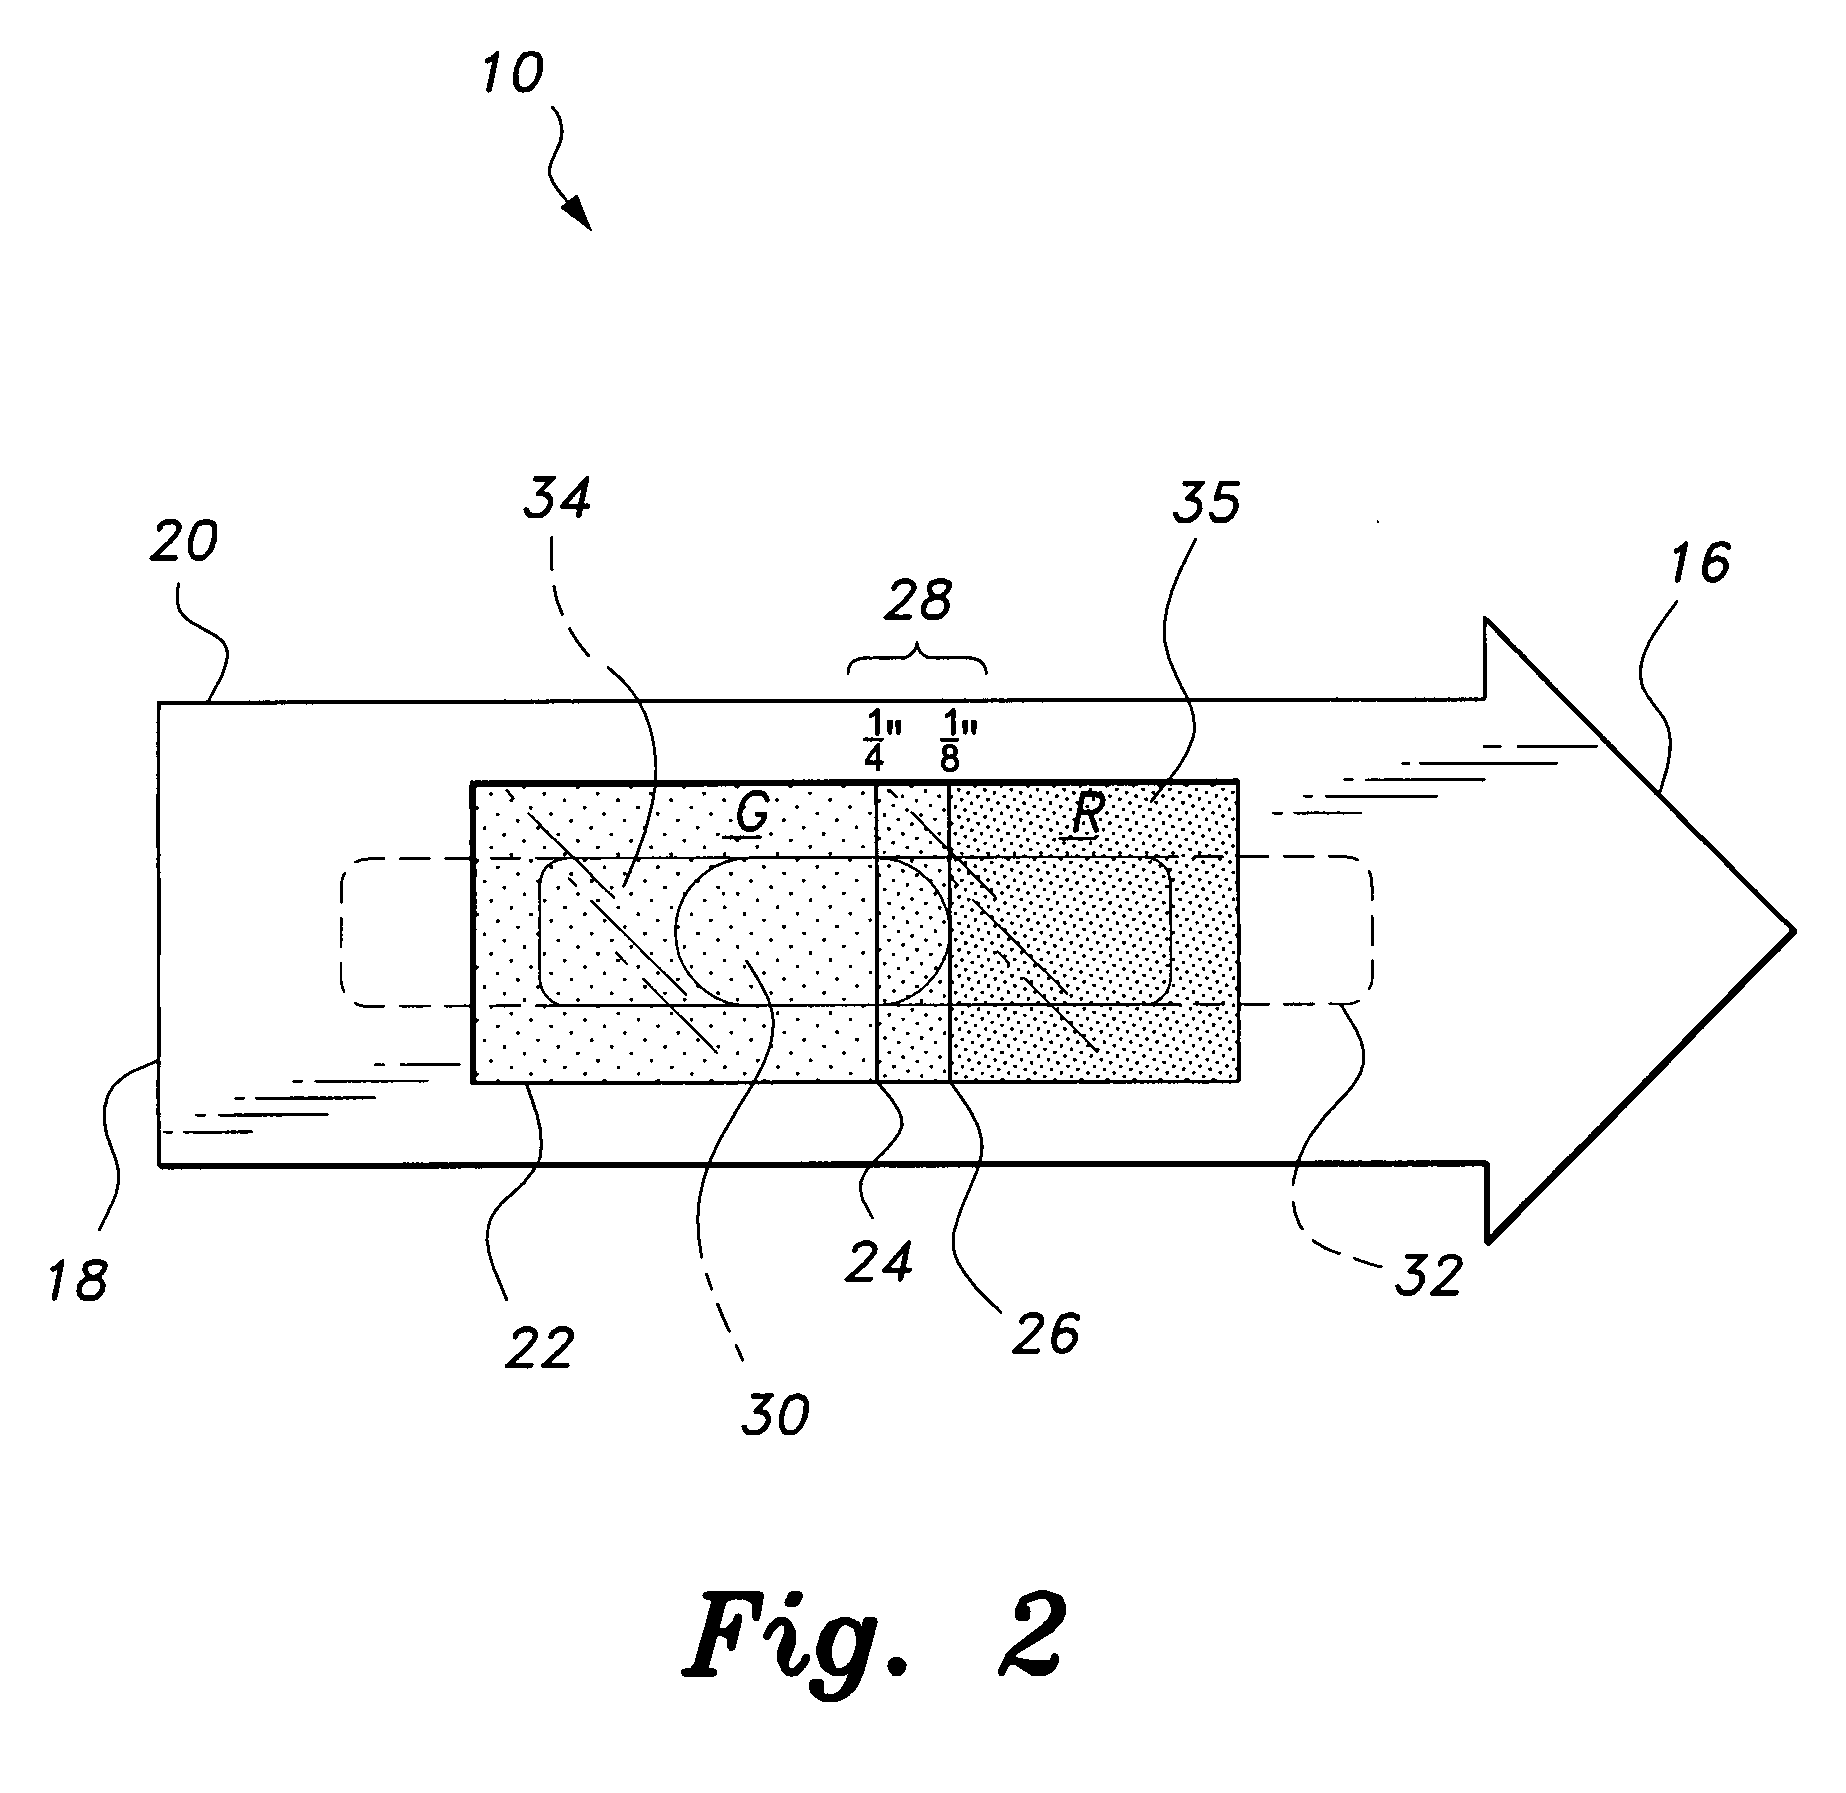 Drainage pipe slope measuring device